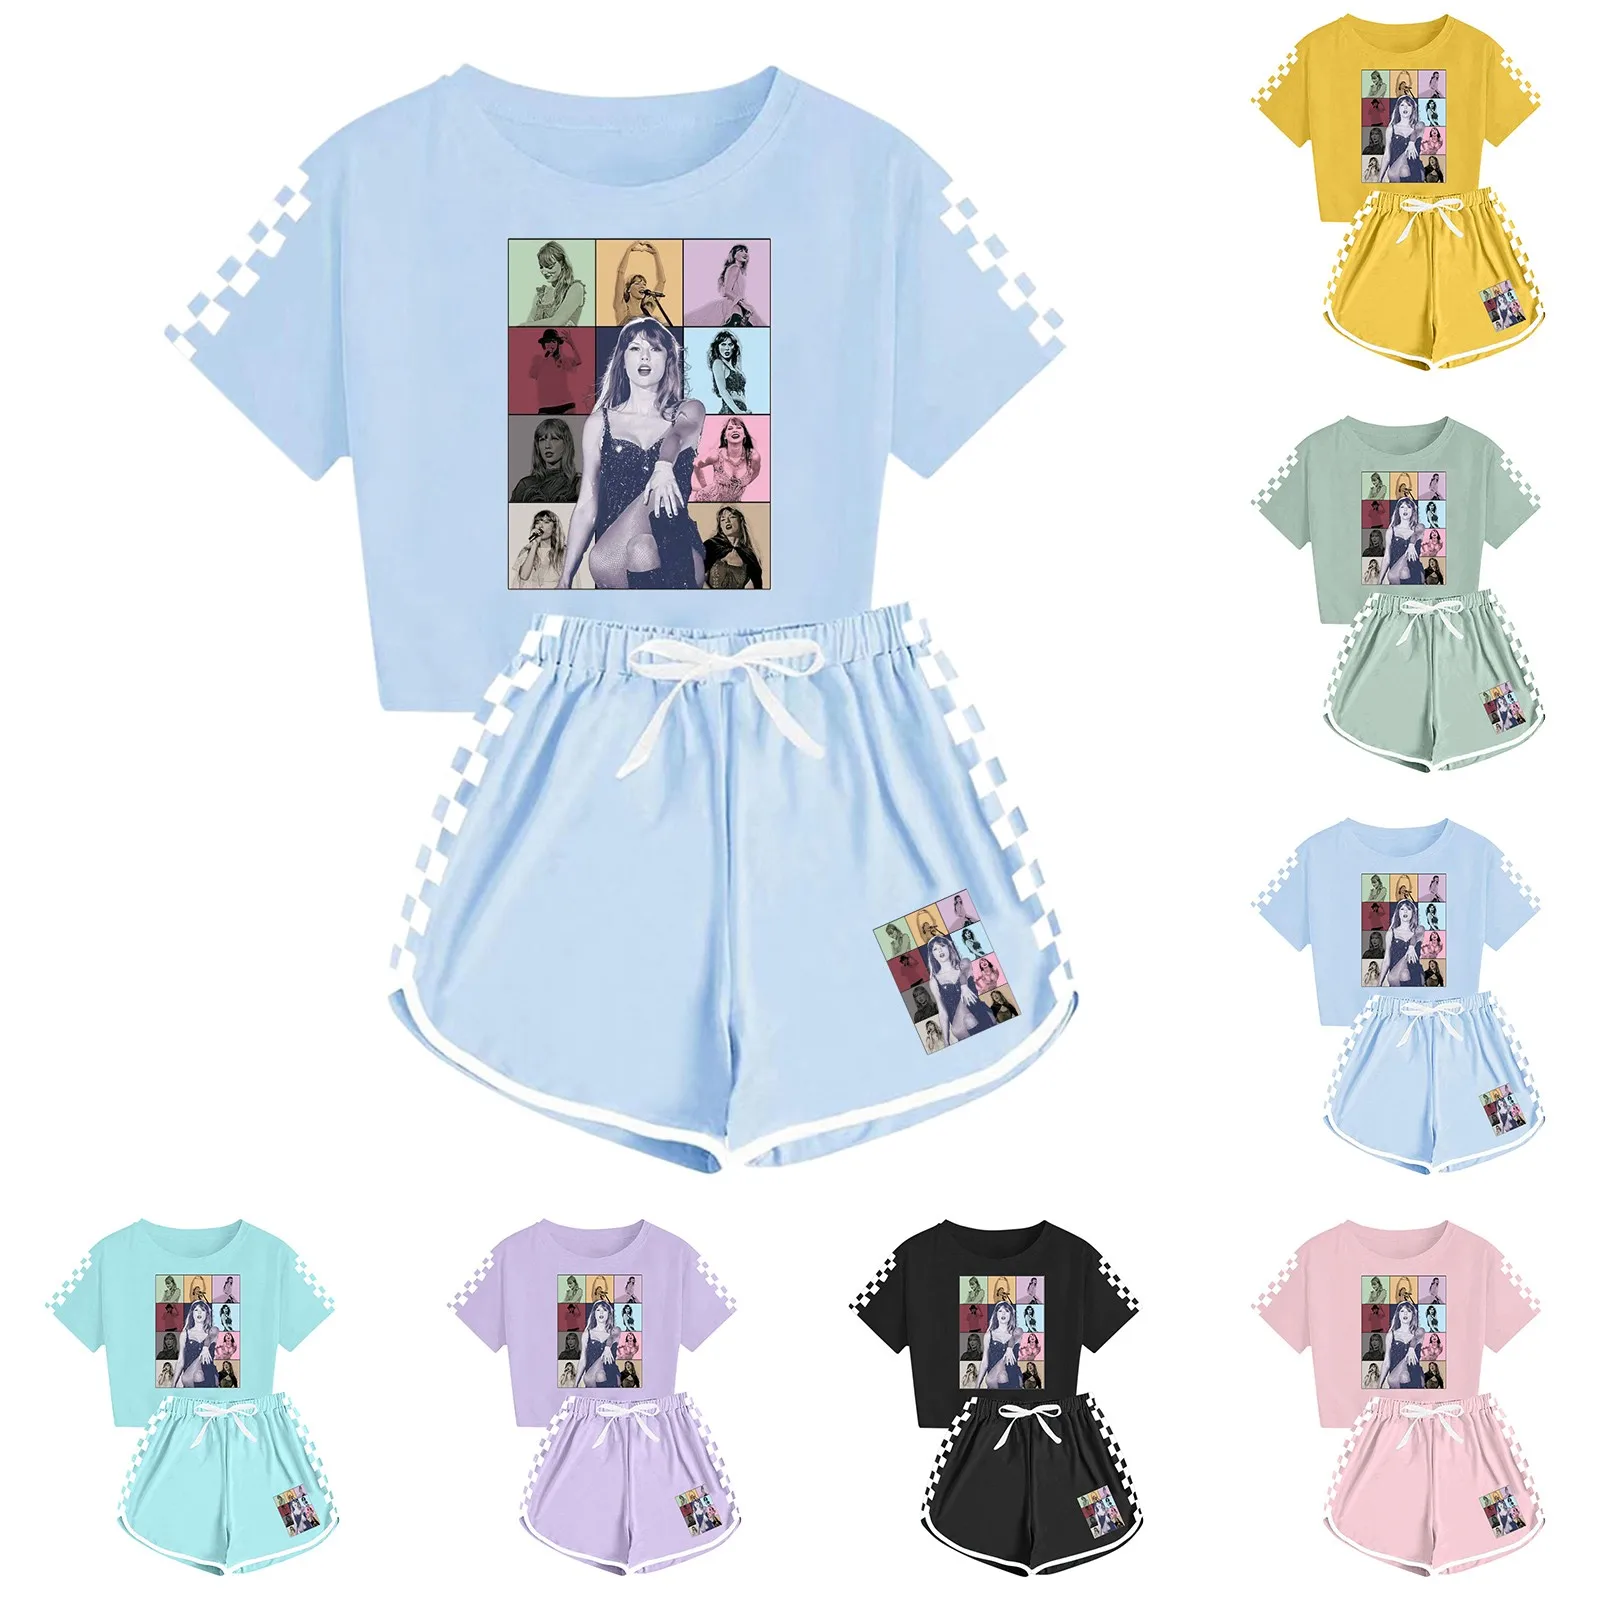 

Taylor Girls Boy Summer Clothing Suits Kids Sports T shirt+Shorts swift 2PC Set Children Clothing Casual Comfort Outfits Pyjamas